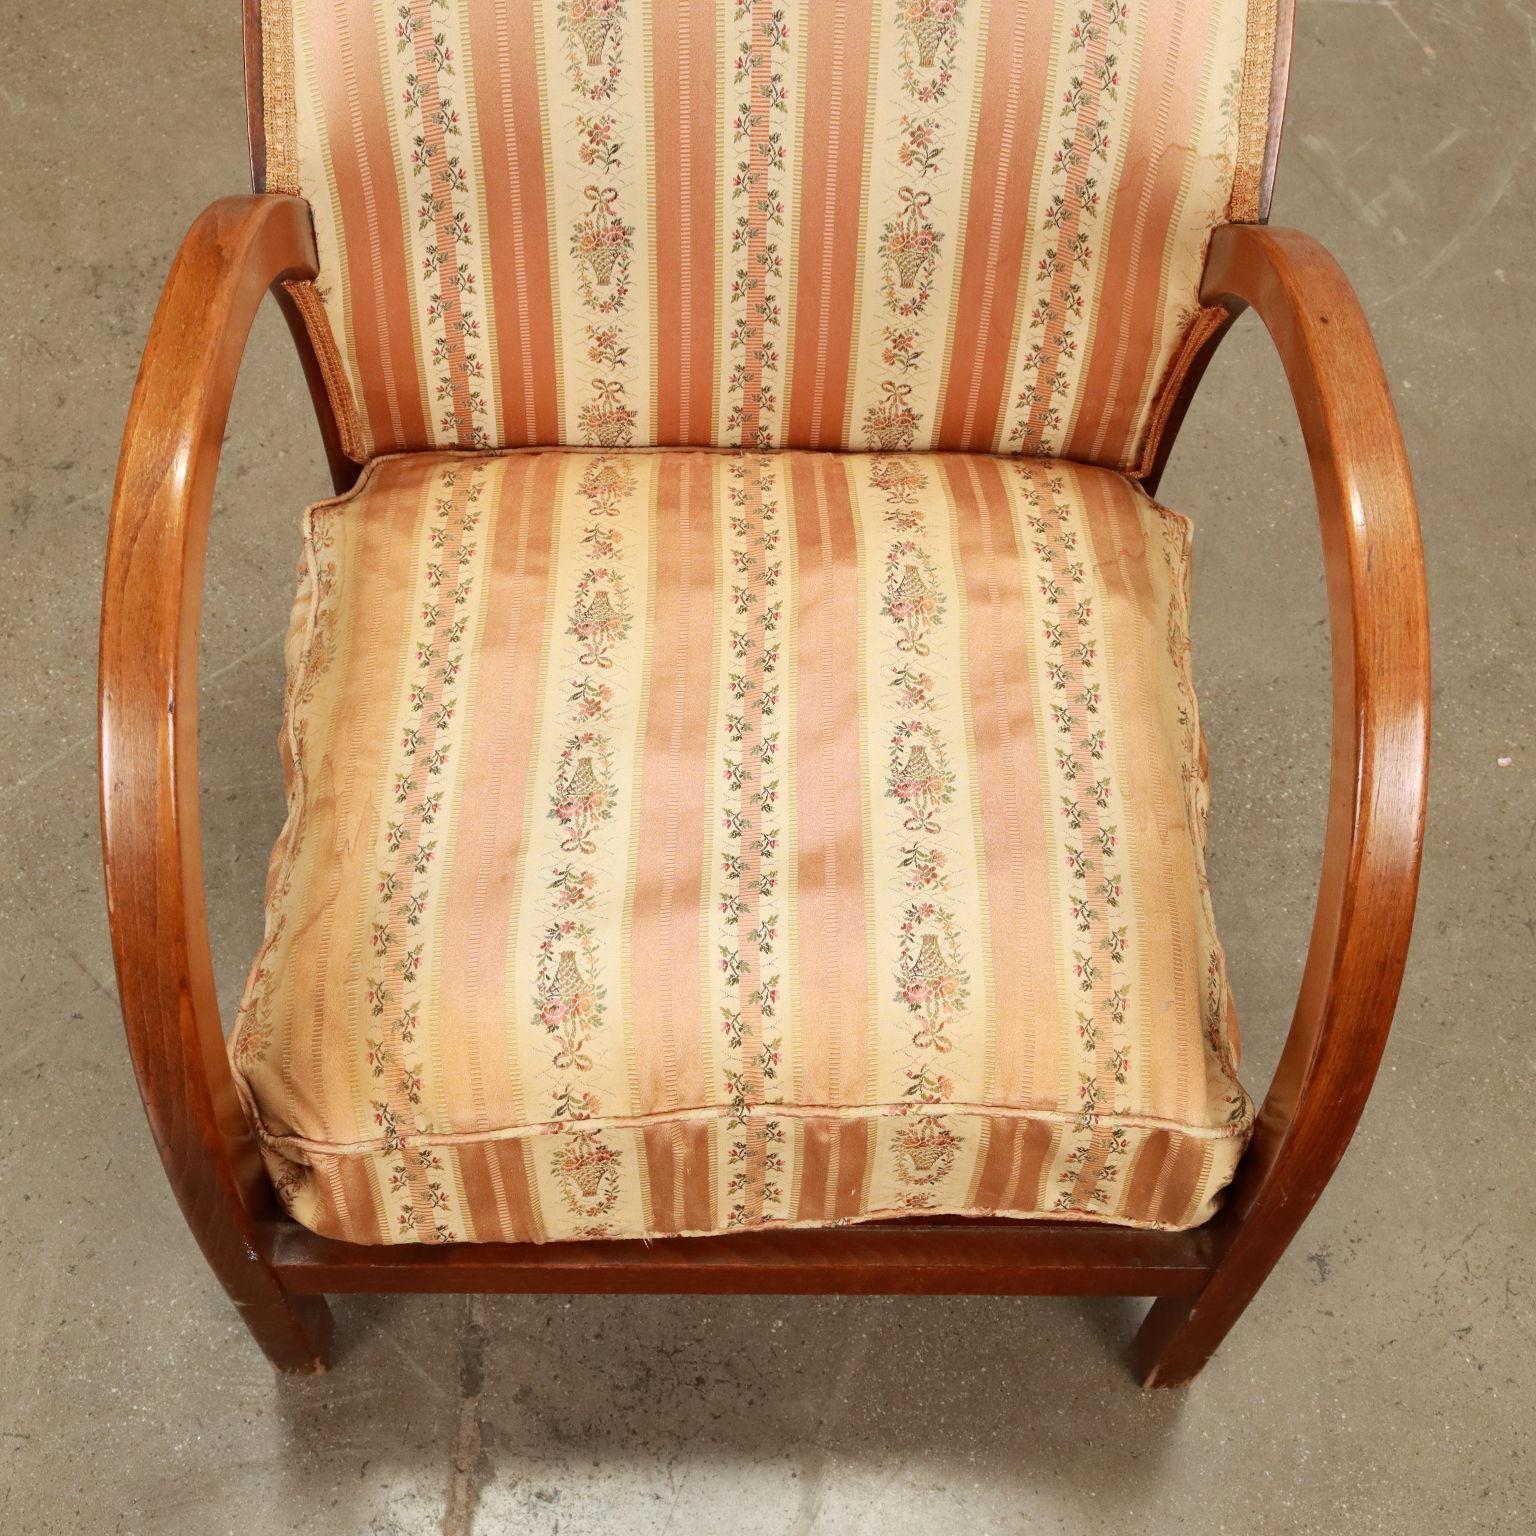 Dyed Poltroncina Anni 50-60 For Sale